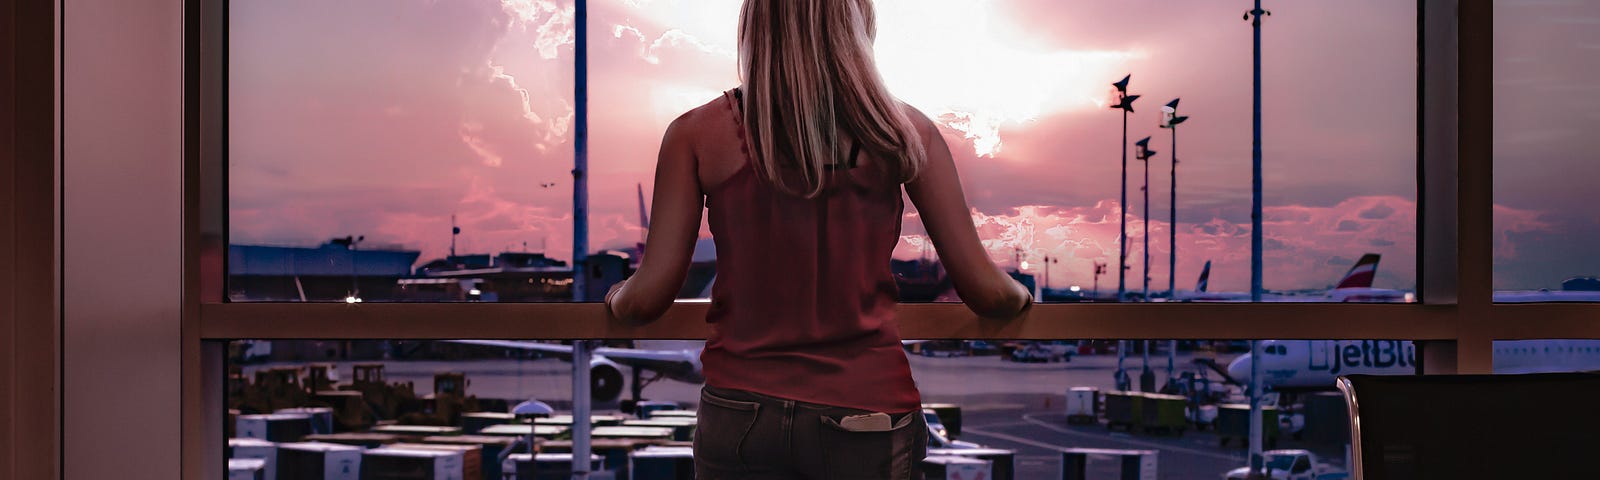 A blonde woman wearing jeans and a red singlet top stares out an airport window that overlooks the tarmac. The sky looks ominous as the sun peeks through the clouds. It’s a forlorn setting. Contemplating her destiny perhaps.